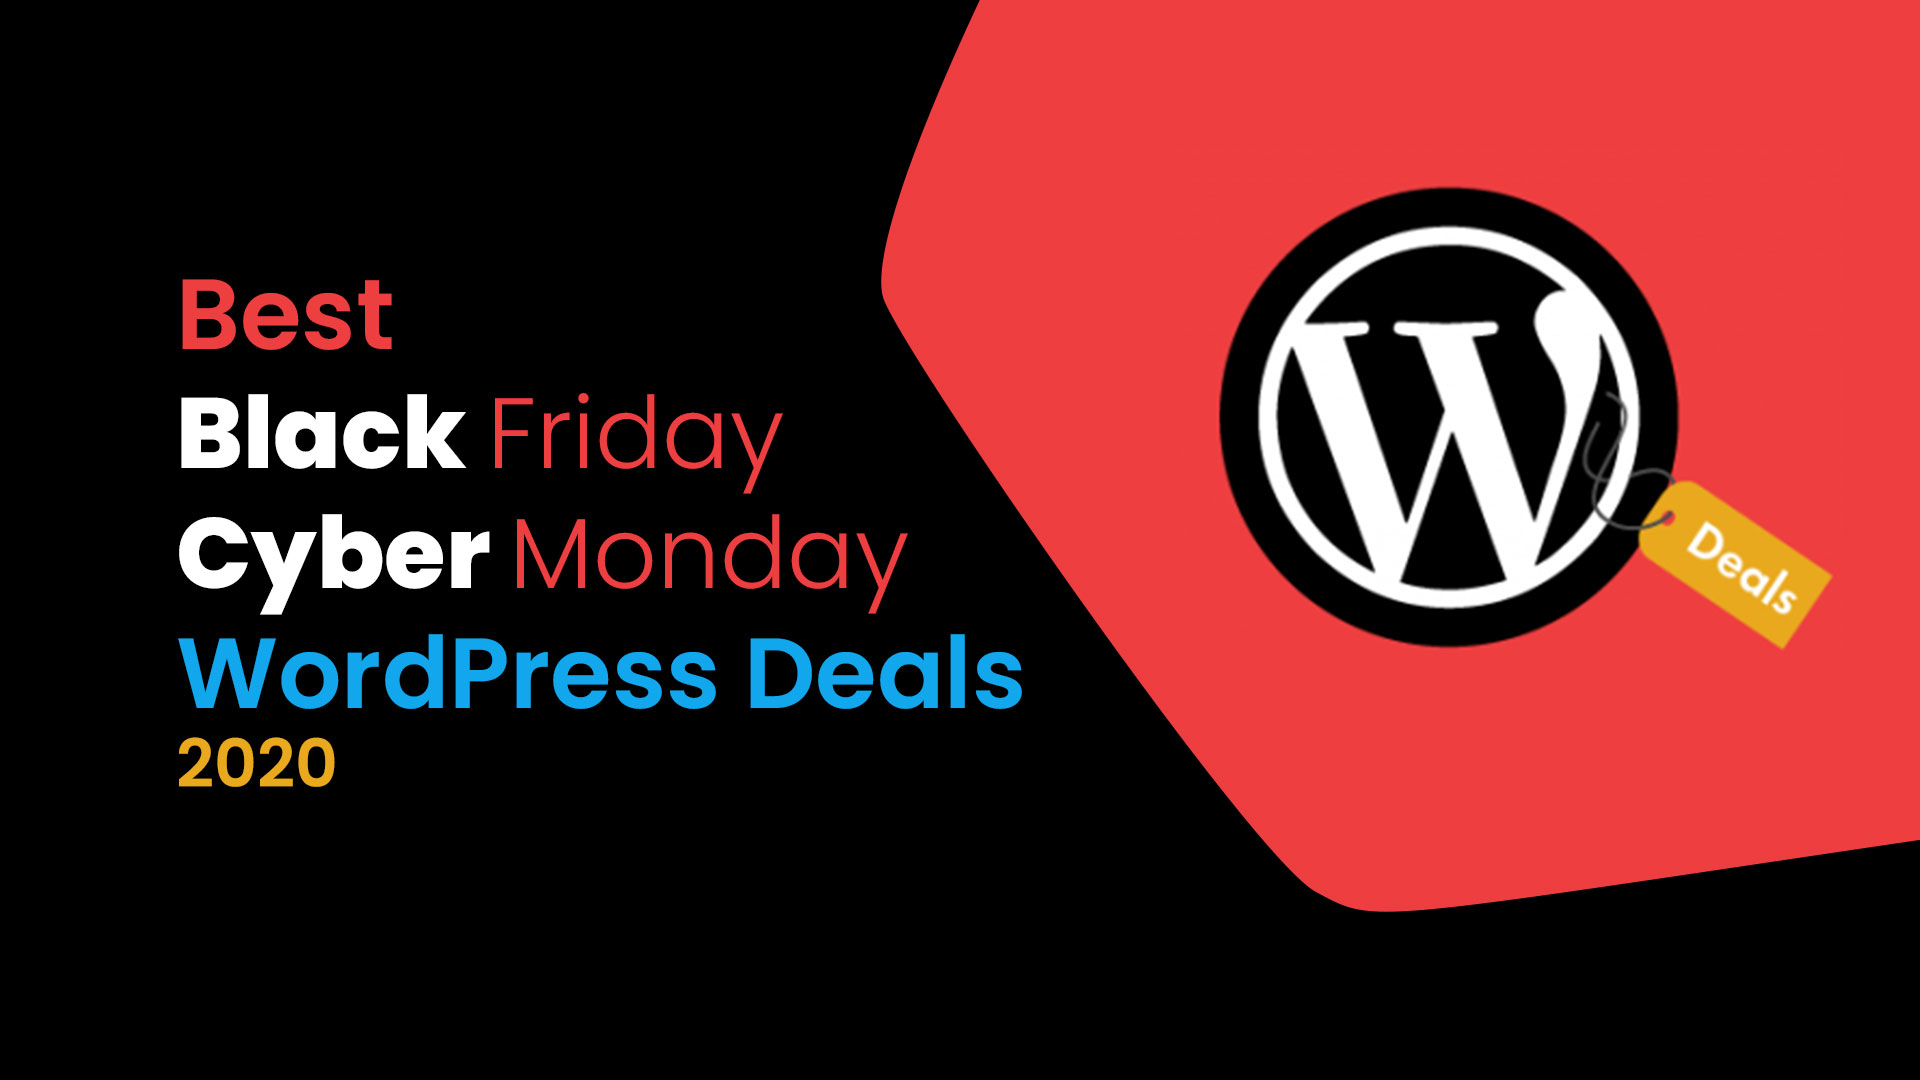 Best Black Friday and Cyber Monday WordPress Deals 2020